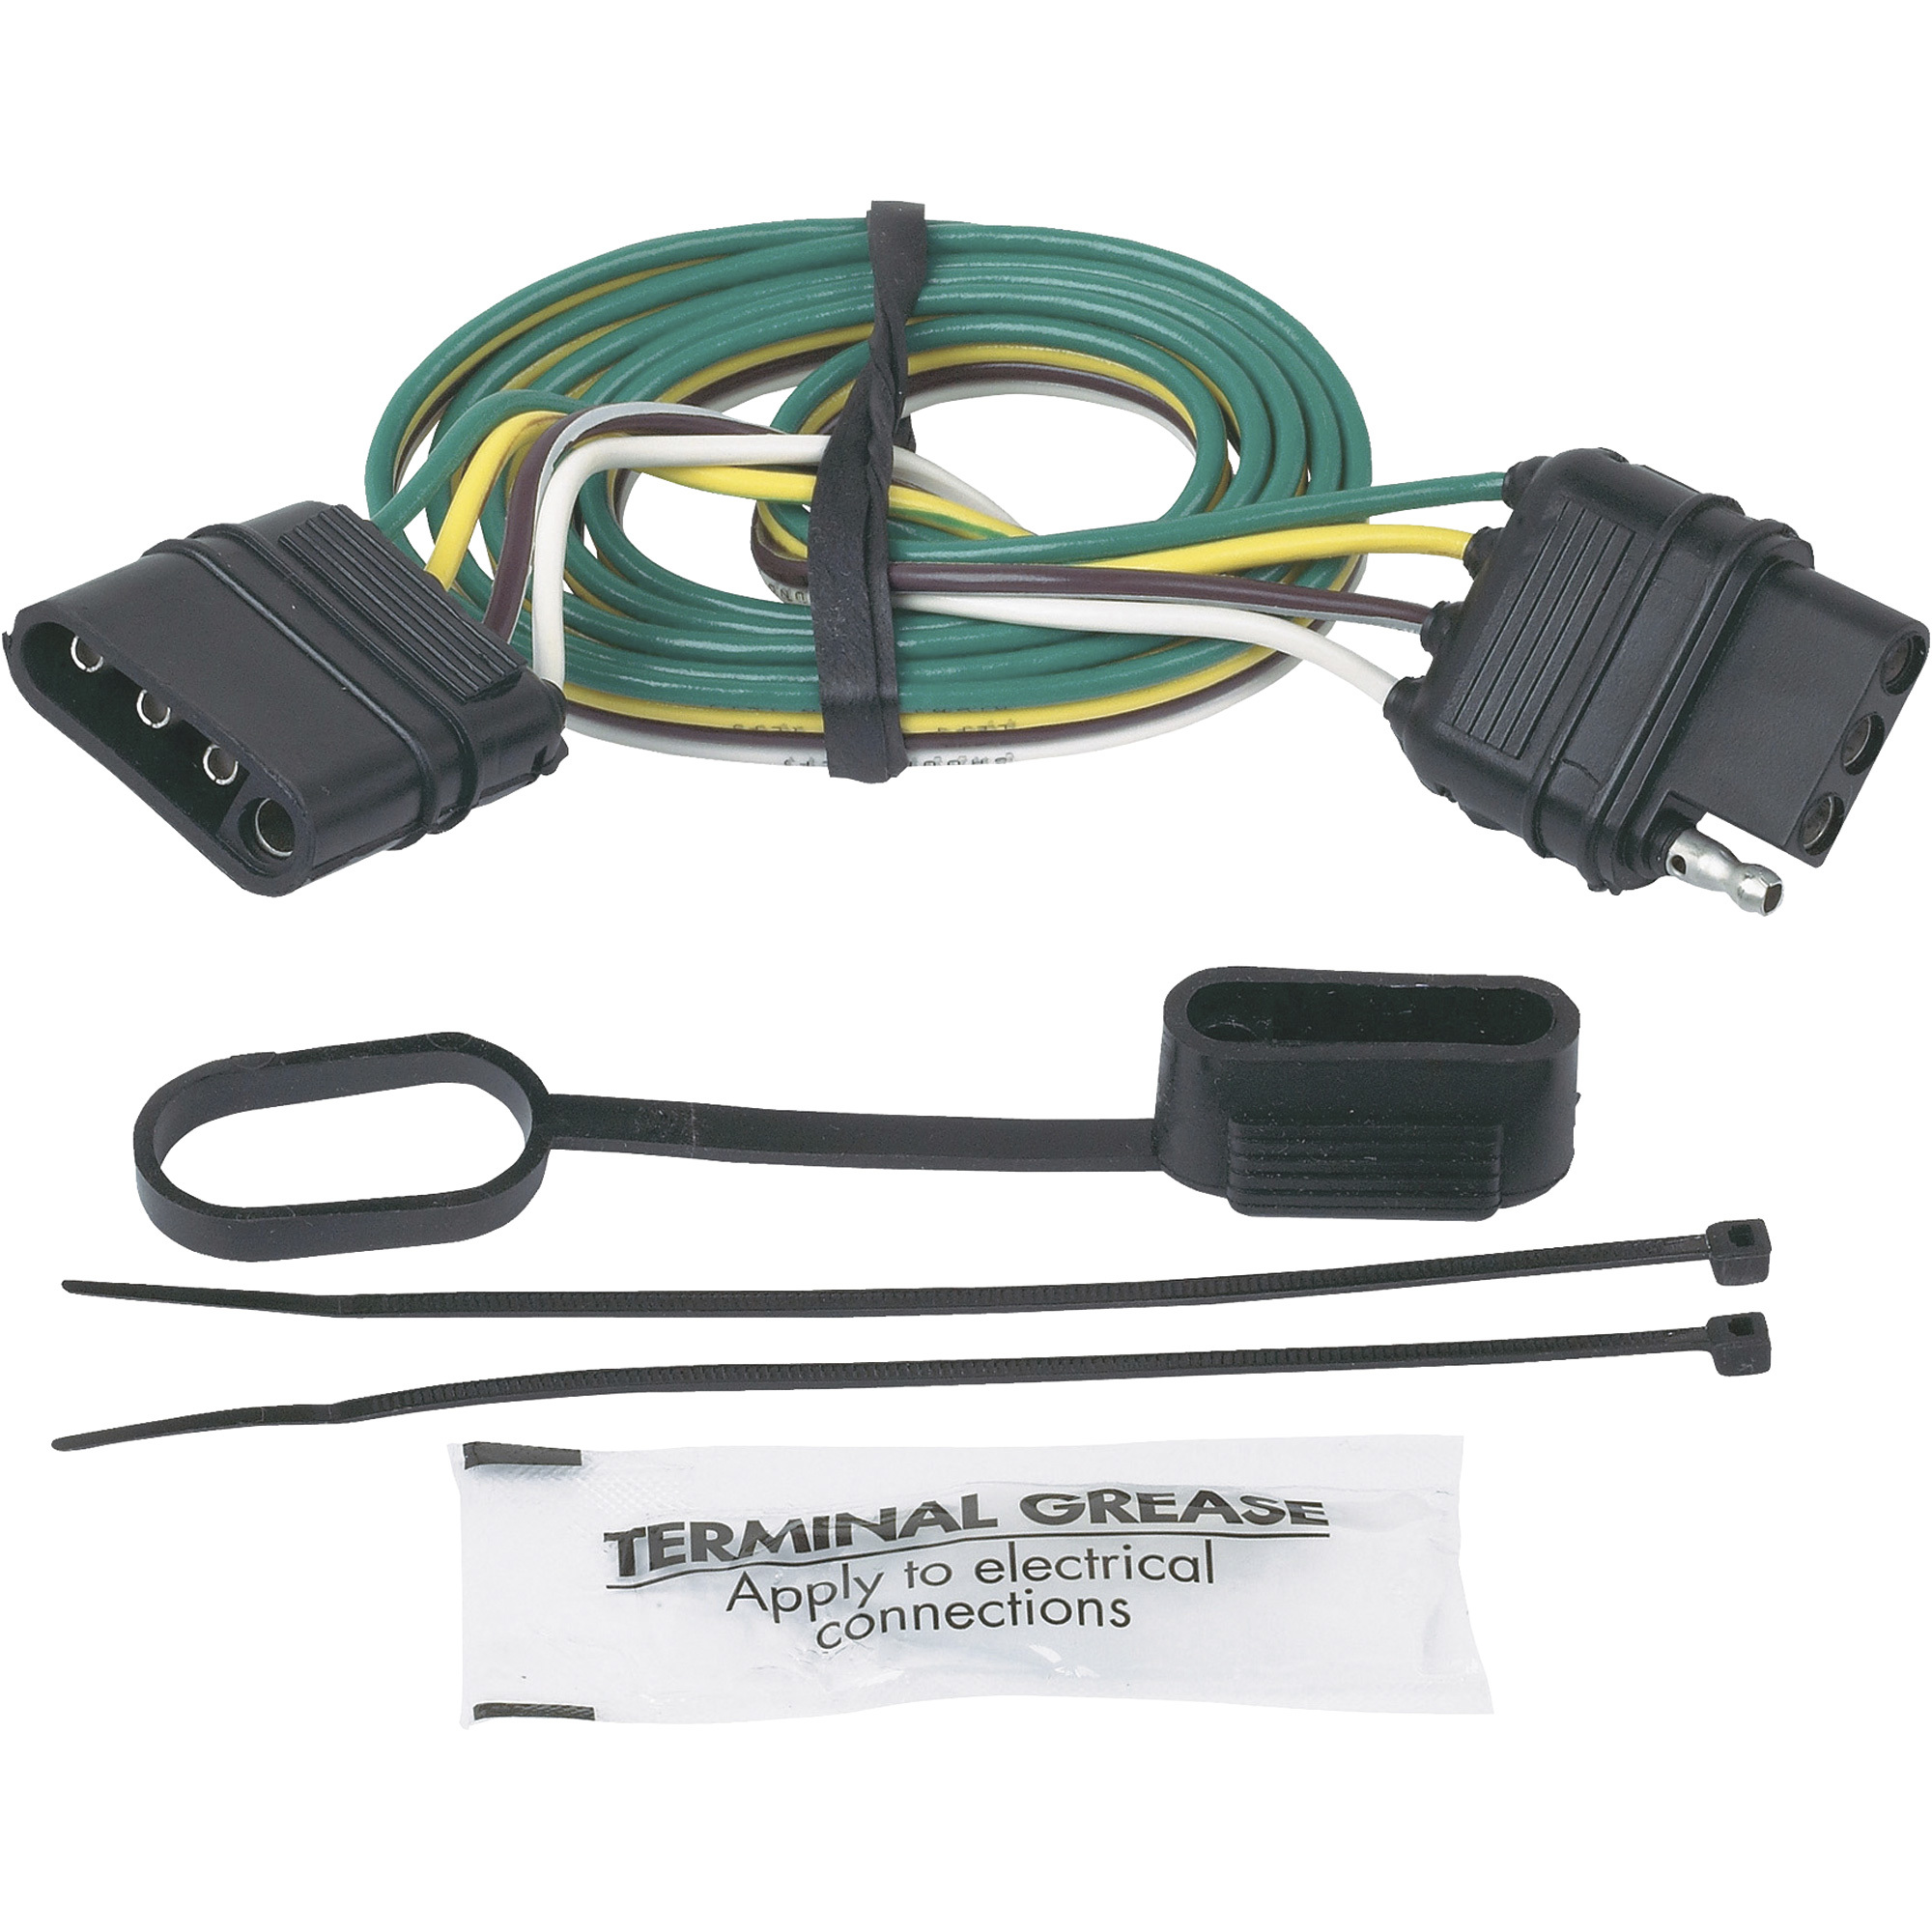 Hopkins Towing Solutions Trailer Light Wiring Adapter â 4-Wire Flat to 4-Wire Flat Extension, 48Inch L, Model 47115